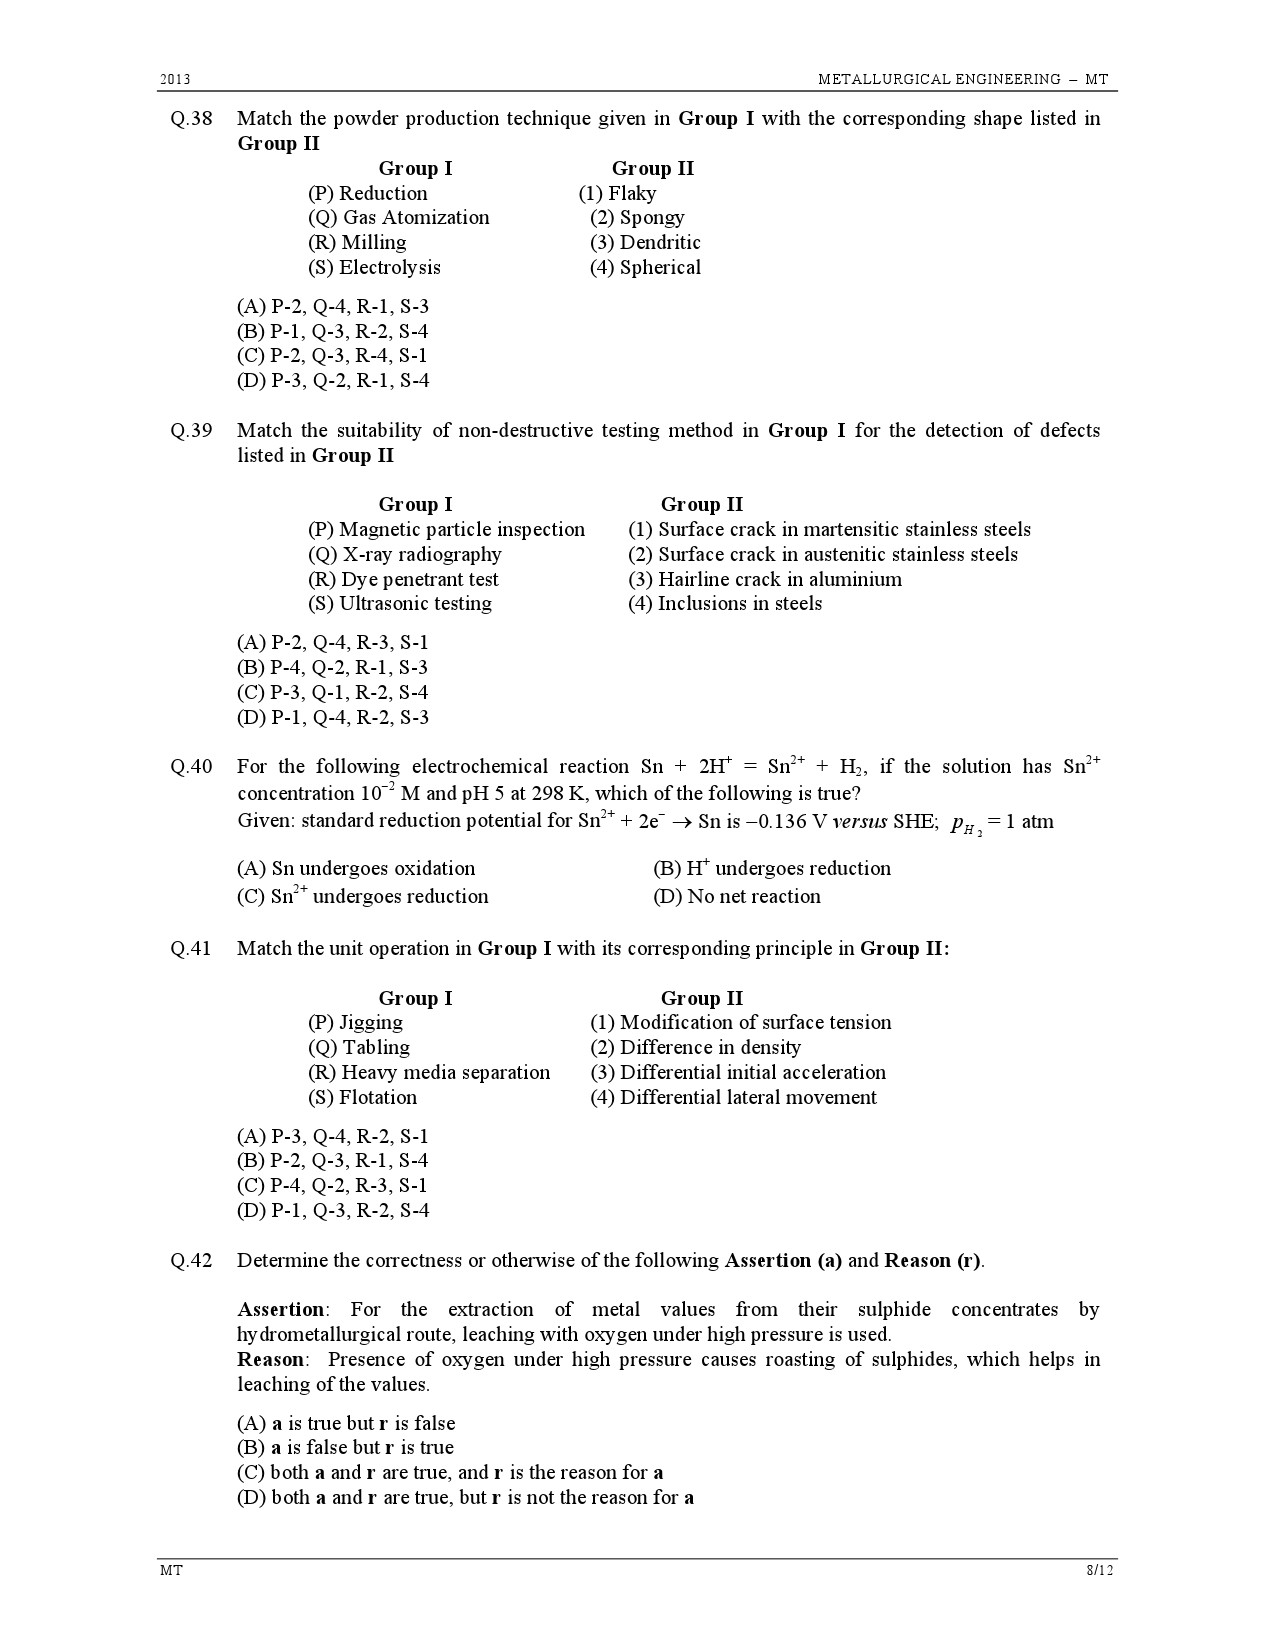 GATE Exam Question Paper 2013 Metallurgical Engineering 8